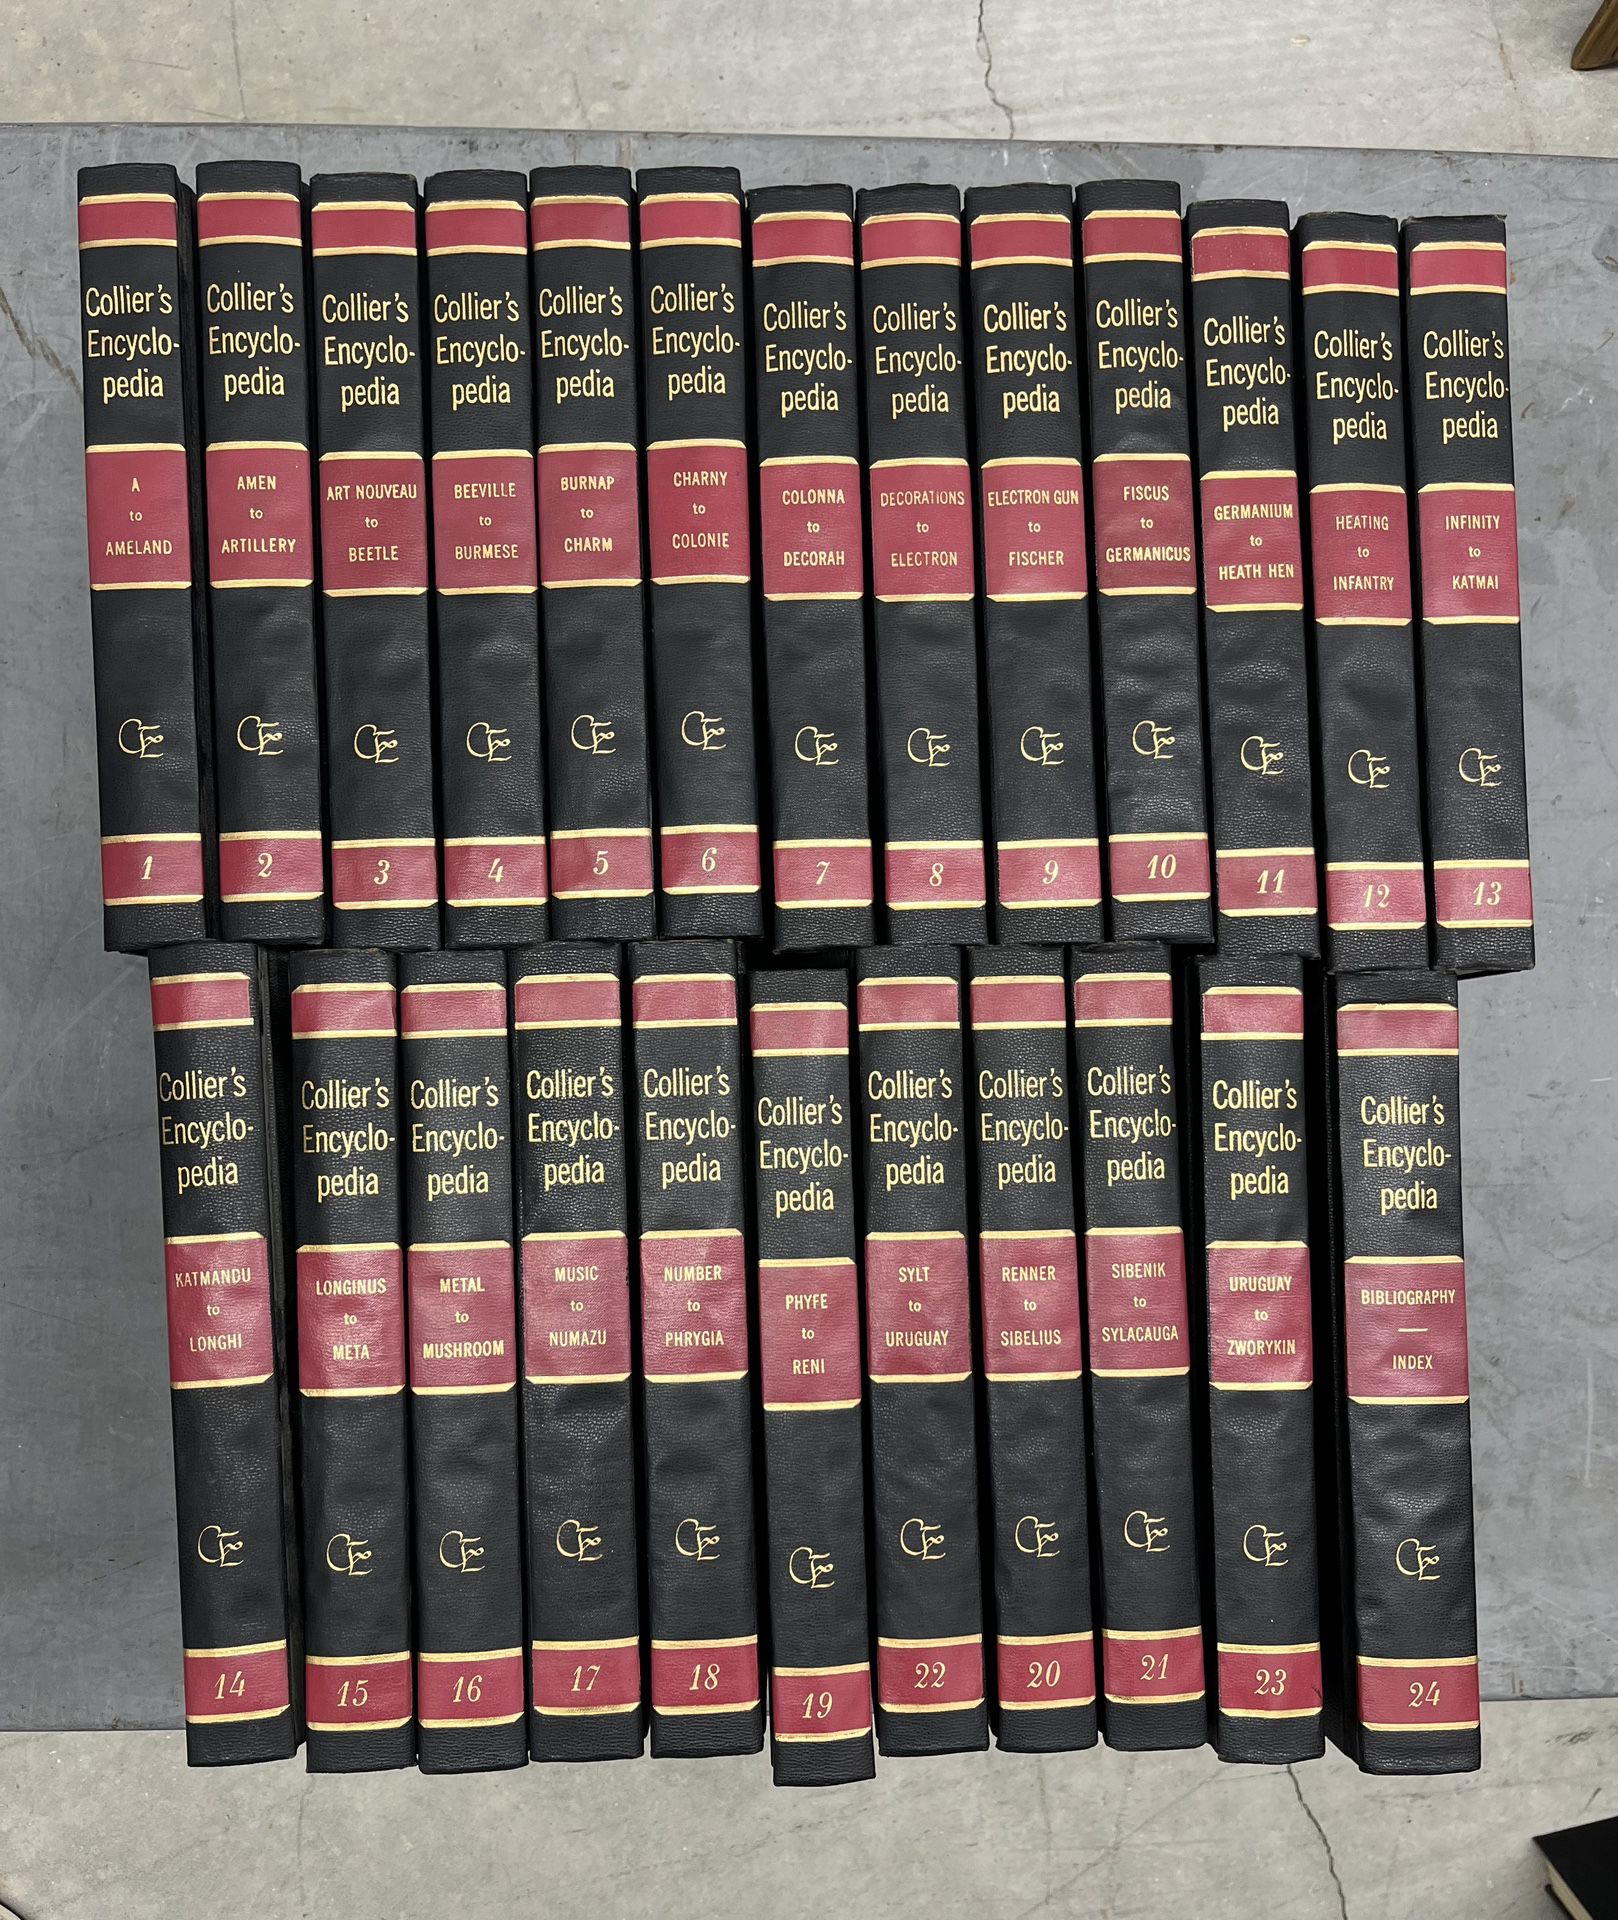 Vintage 1962 Encyclopedia Complete Set By Collier’s Books